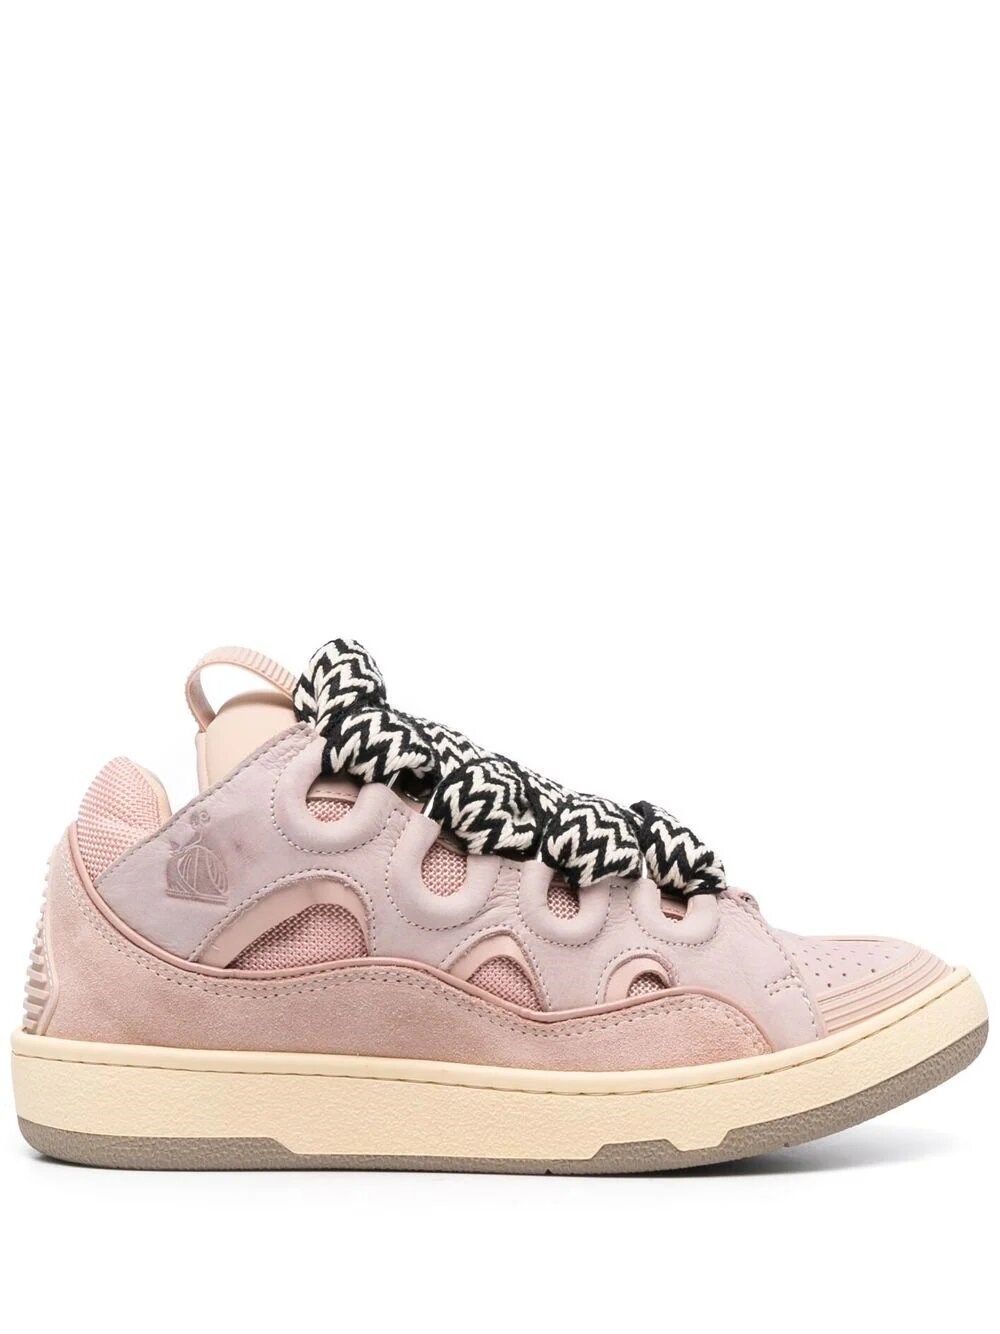 Lanvin Curb Light Trainers In Rosado